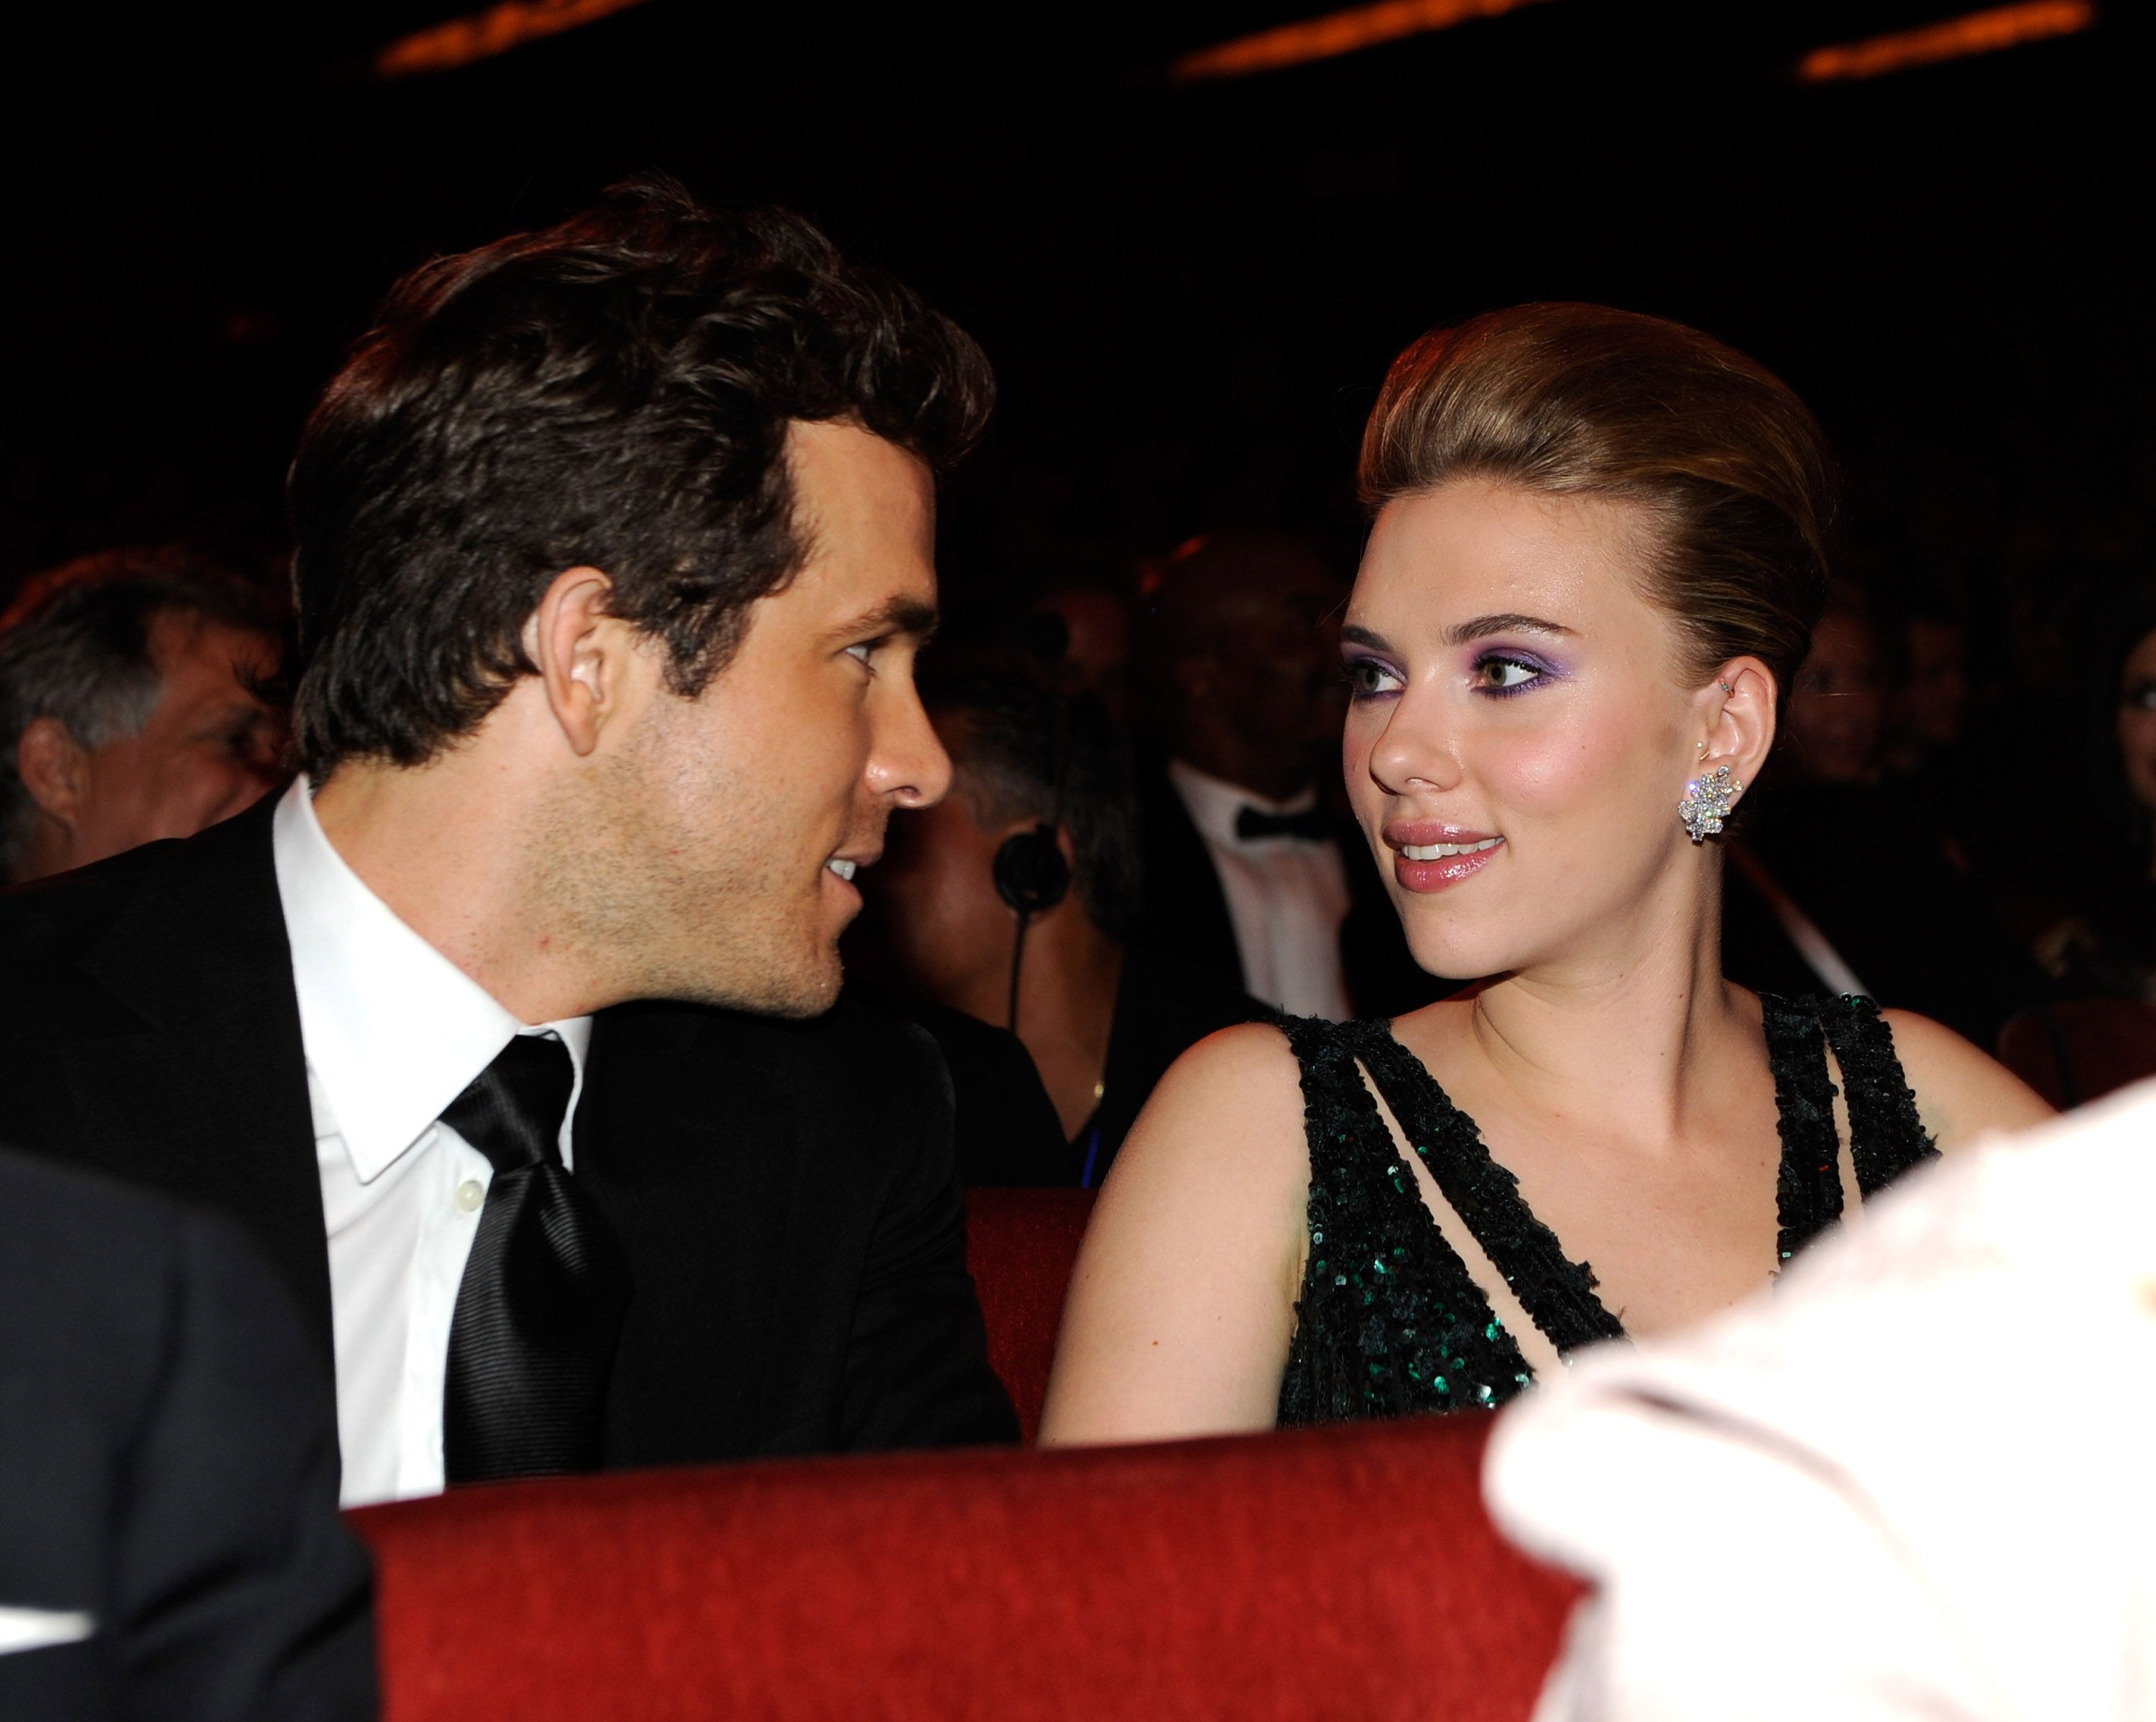 Ryan Reynolds and Scarlett Johansson at the 64th Annual Tony Awards in 2010 in New York City | Source: Getty Images